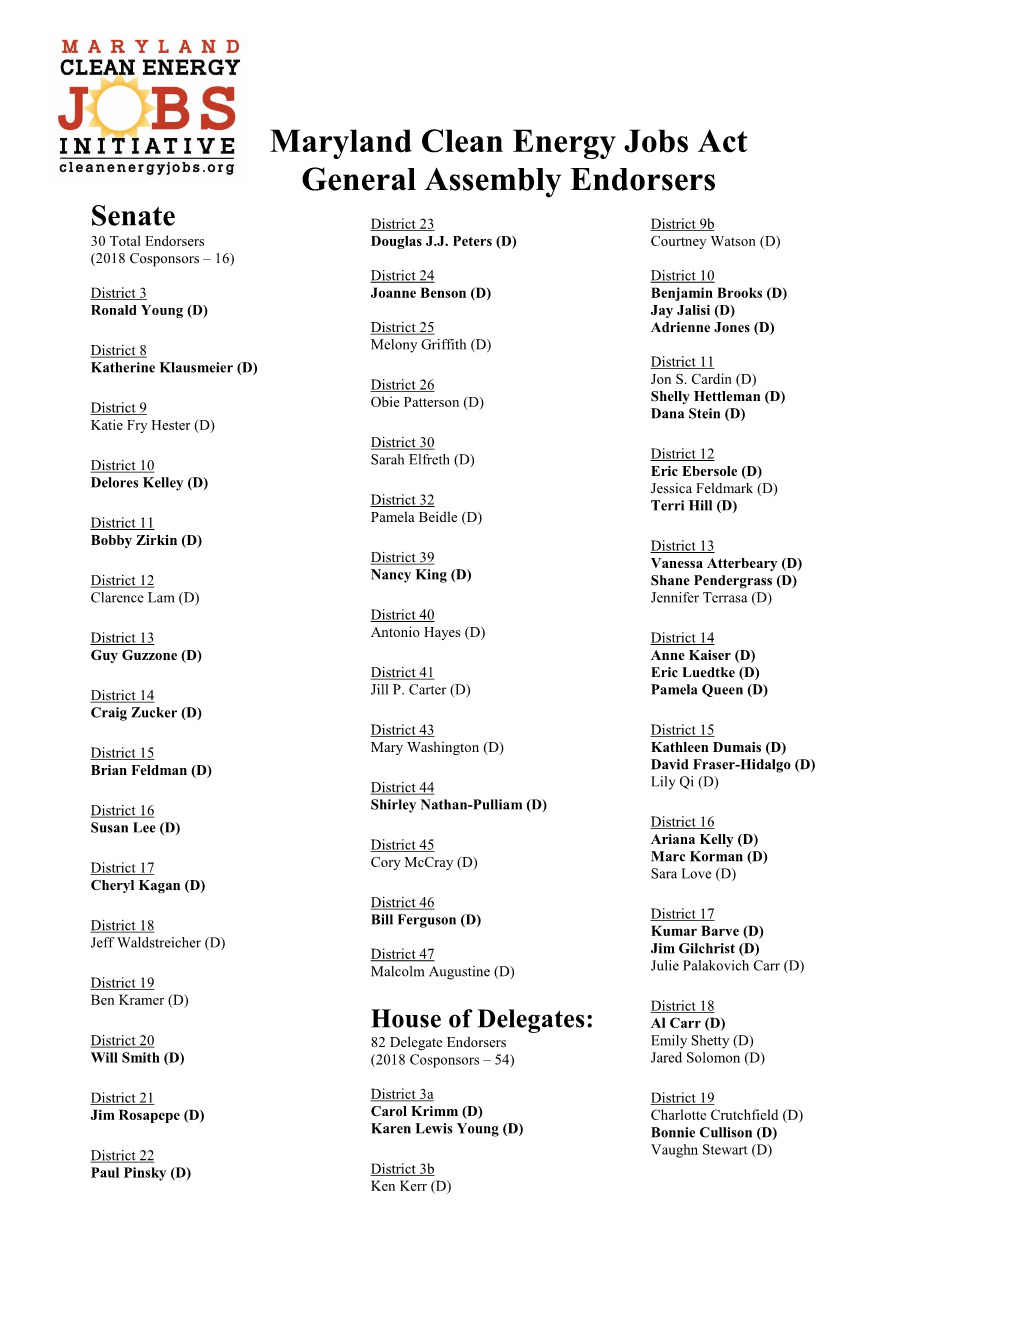 Maryland Clean Energy Jobs Act General Assembly Endorsers